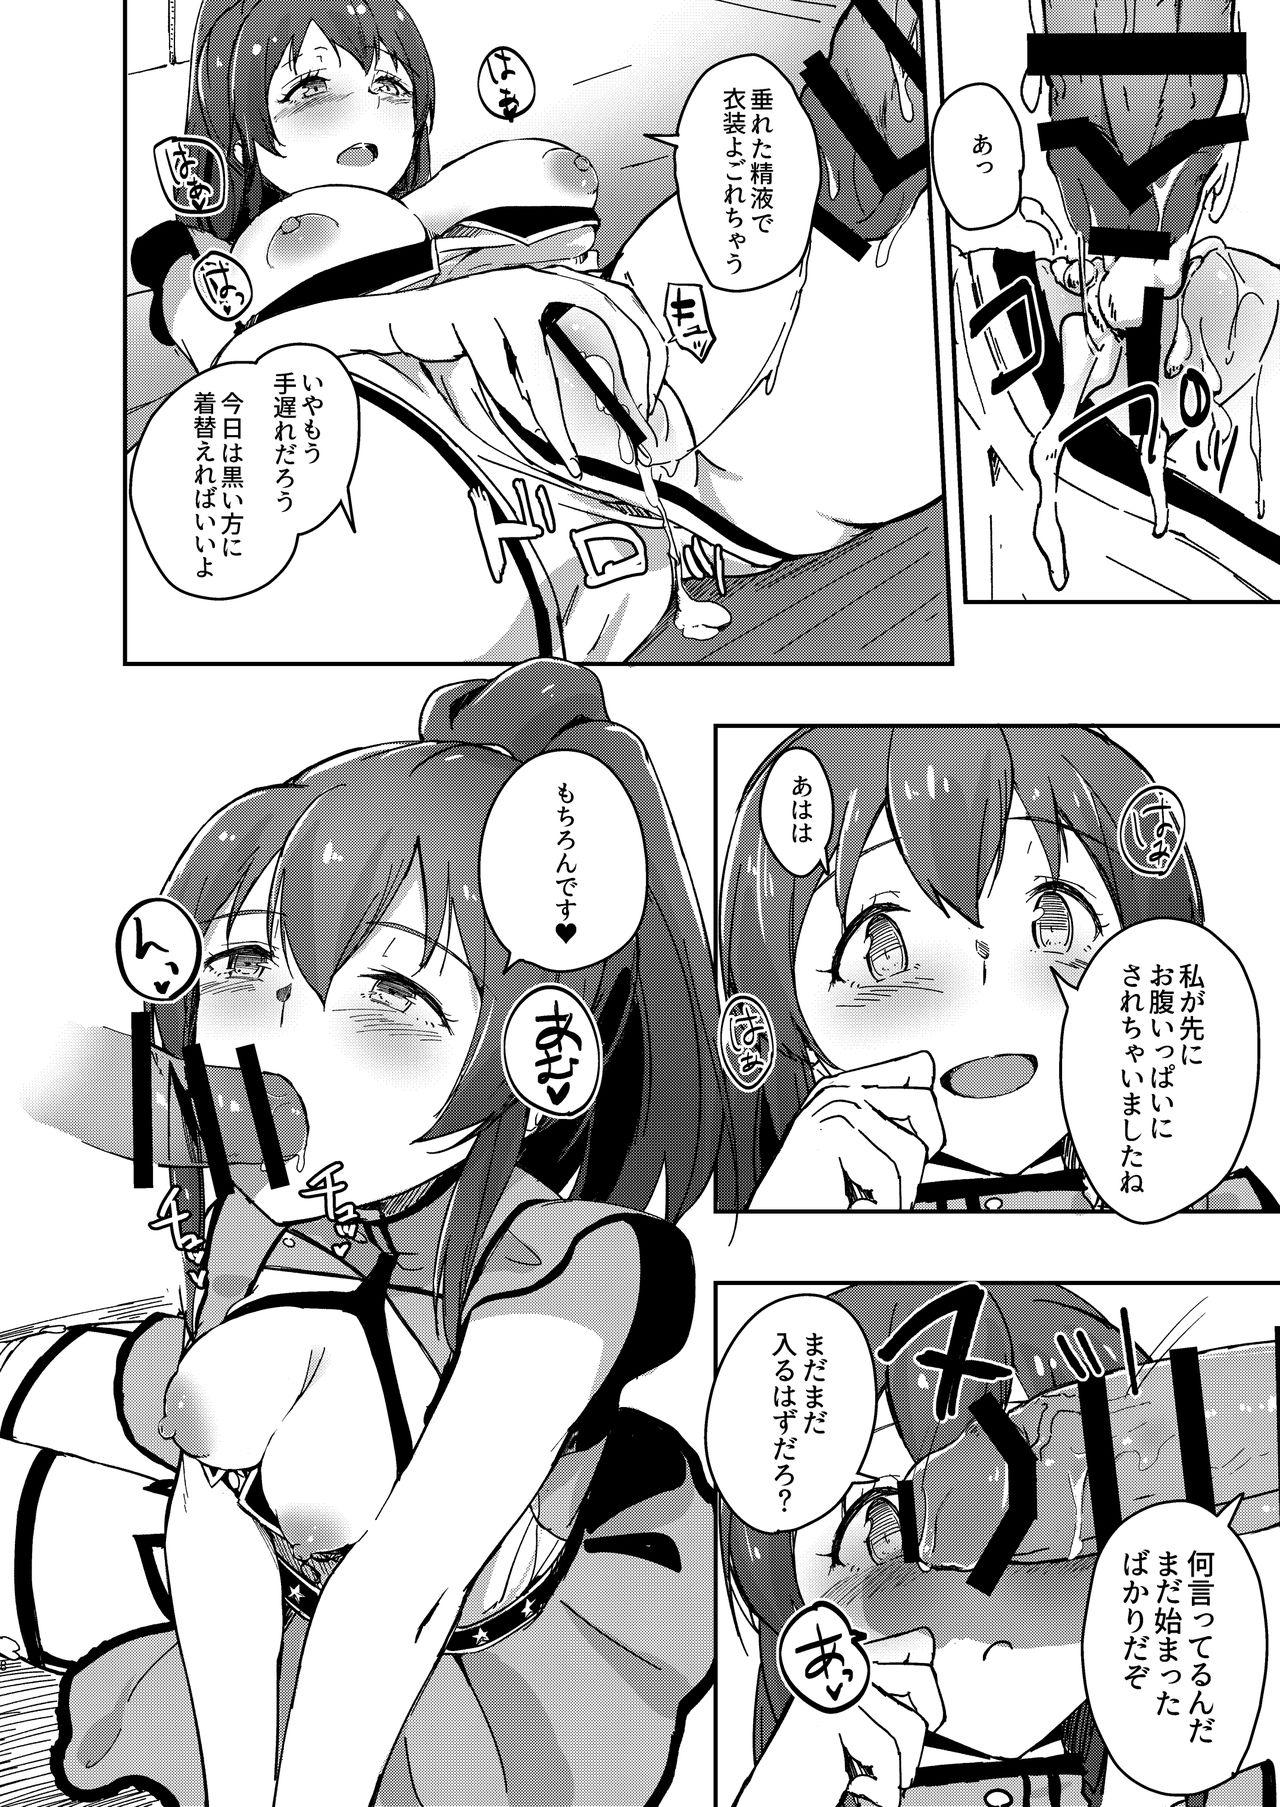 Gangbang TOP! CLOVER BOOK + omake - The idolmaster Indonesian - Page 7